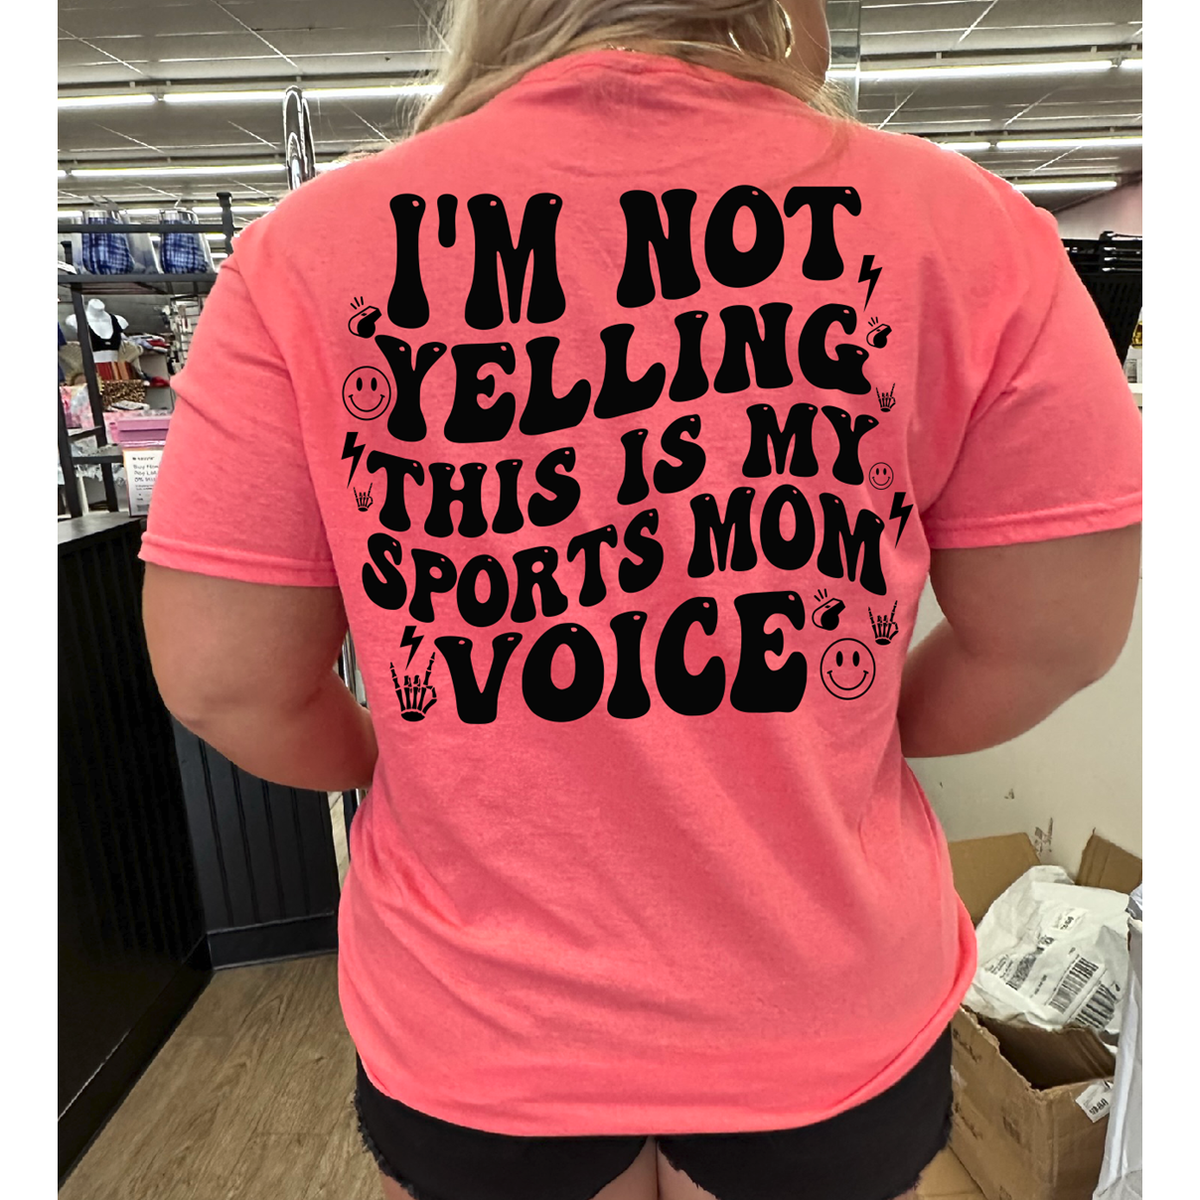 This is my Sports Mom Voice Tee or sweatshirt